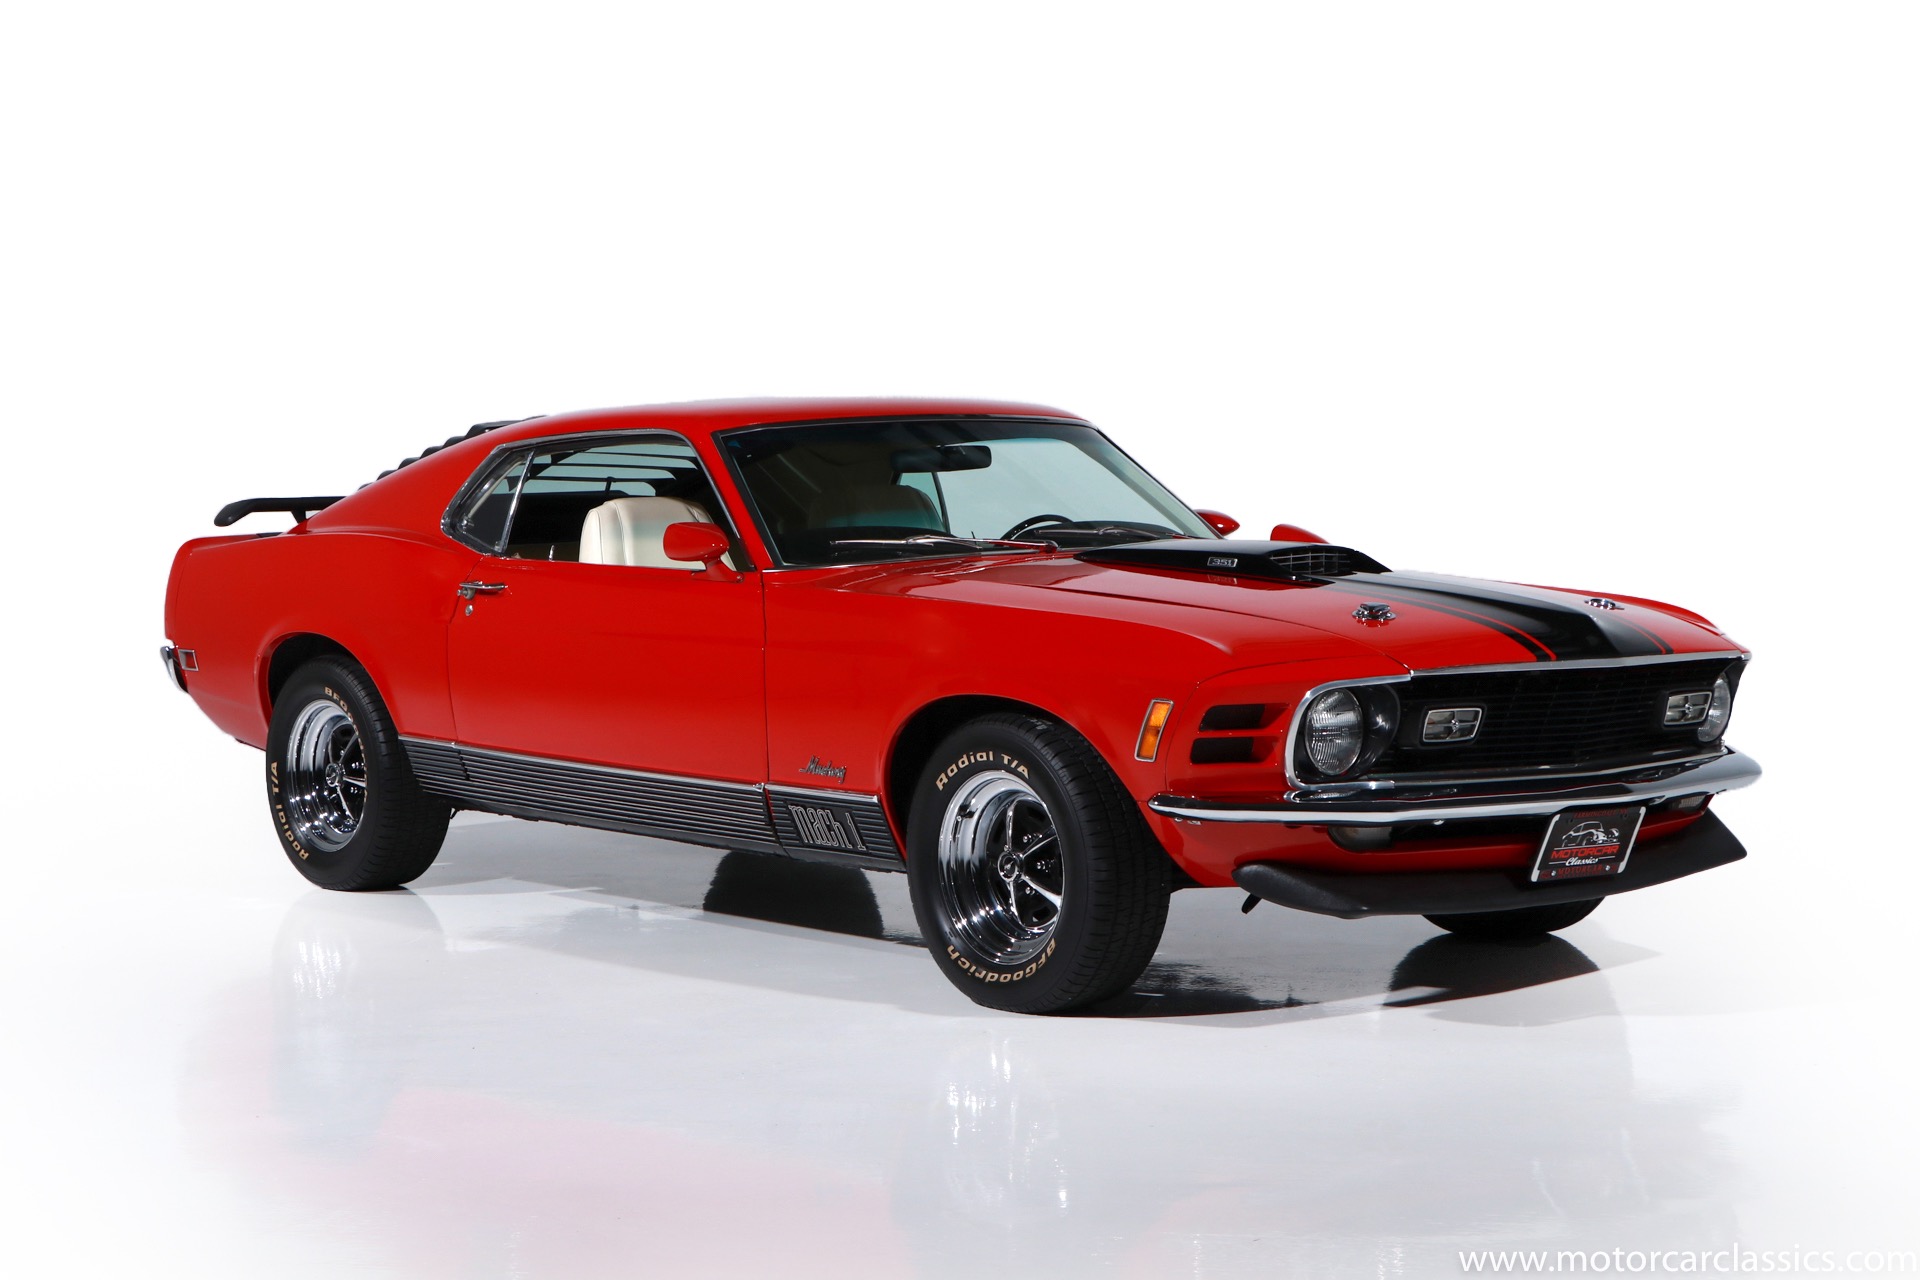 Used 1970 Ford Mustang Mach 1 For Sale ($49,900) | Motorcar Classics ...